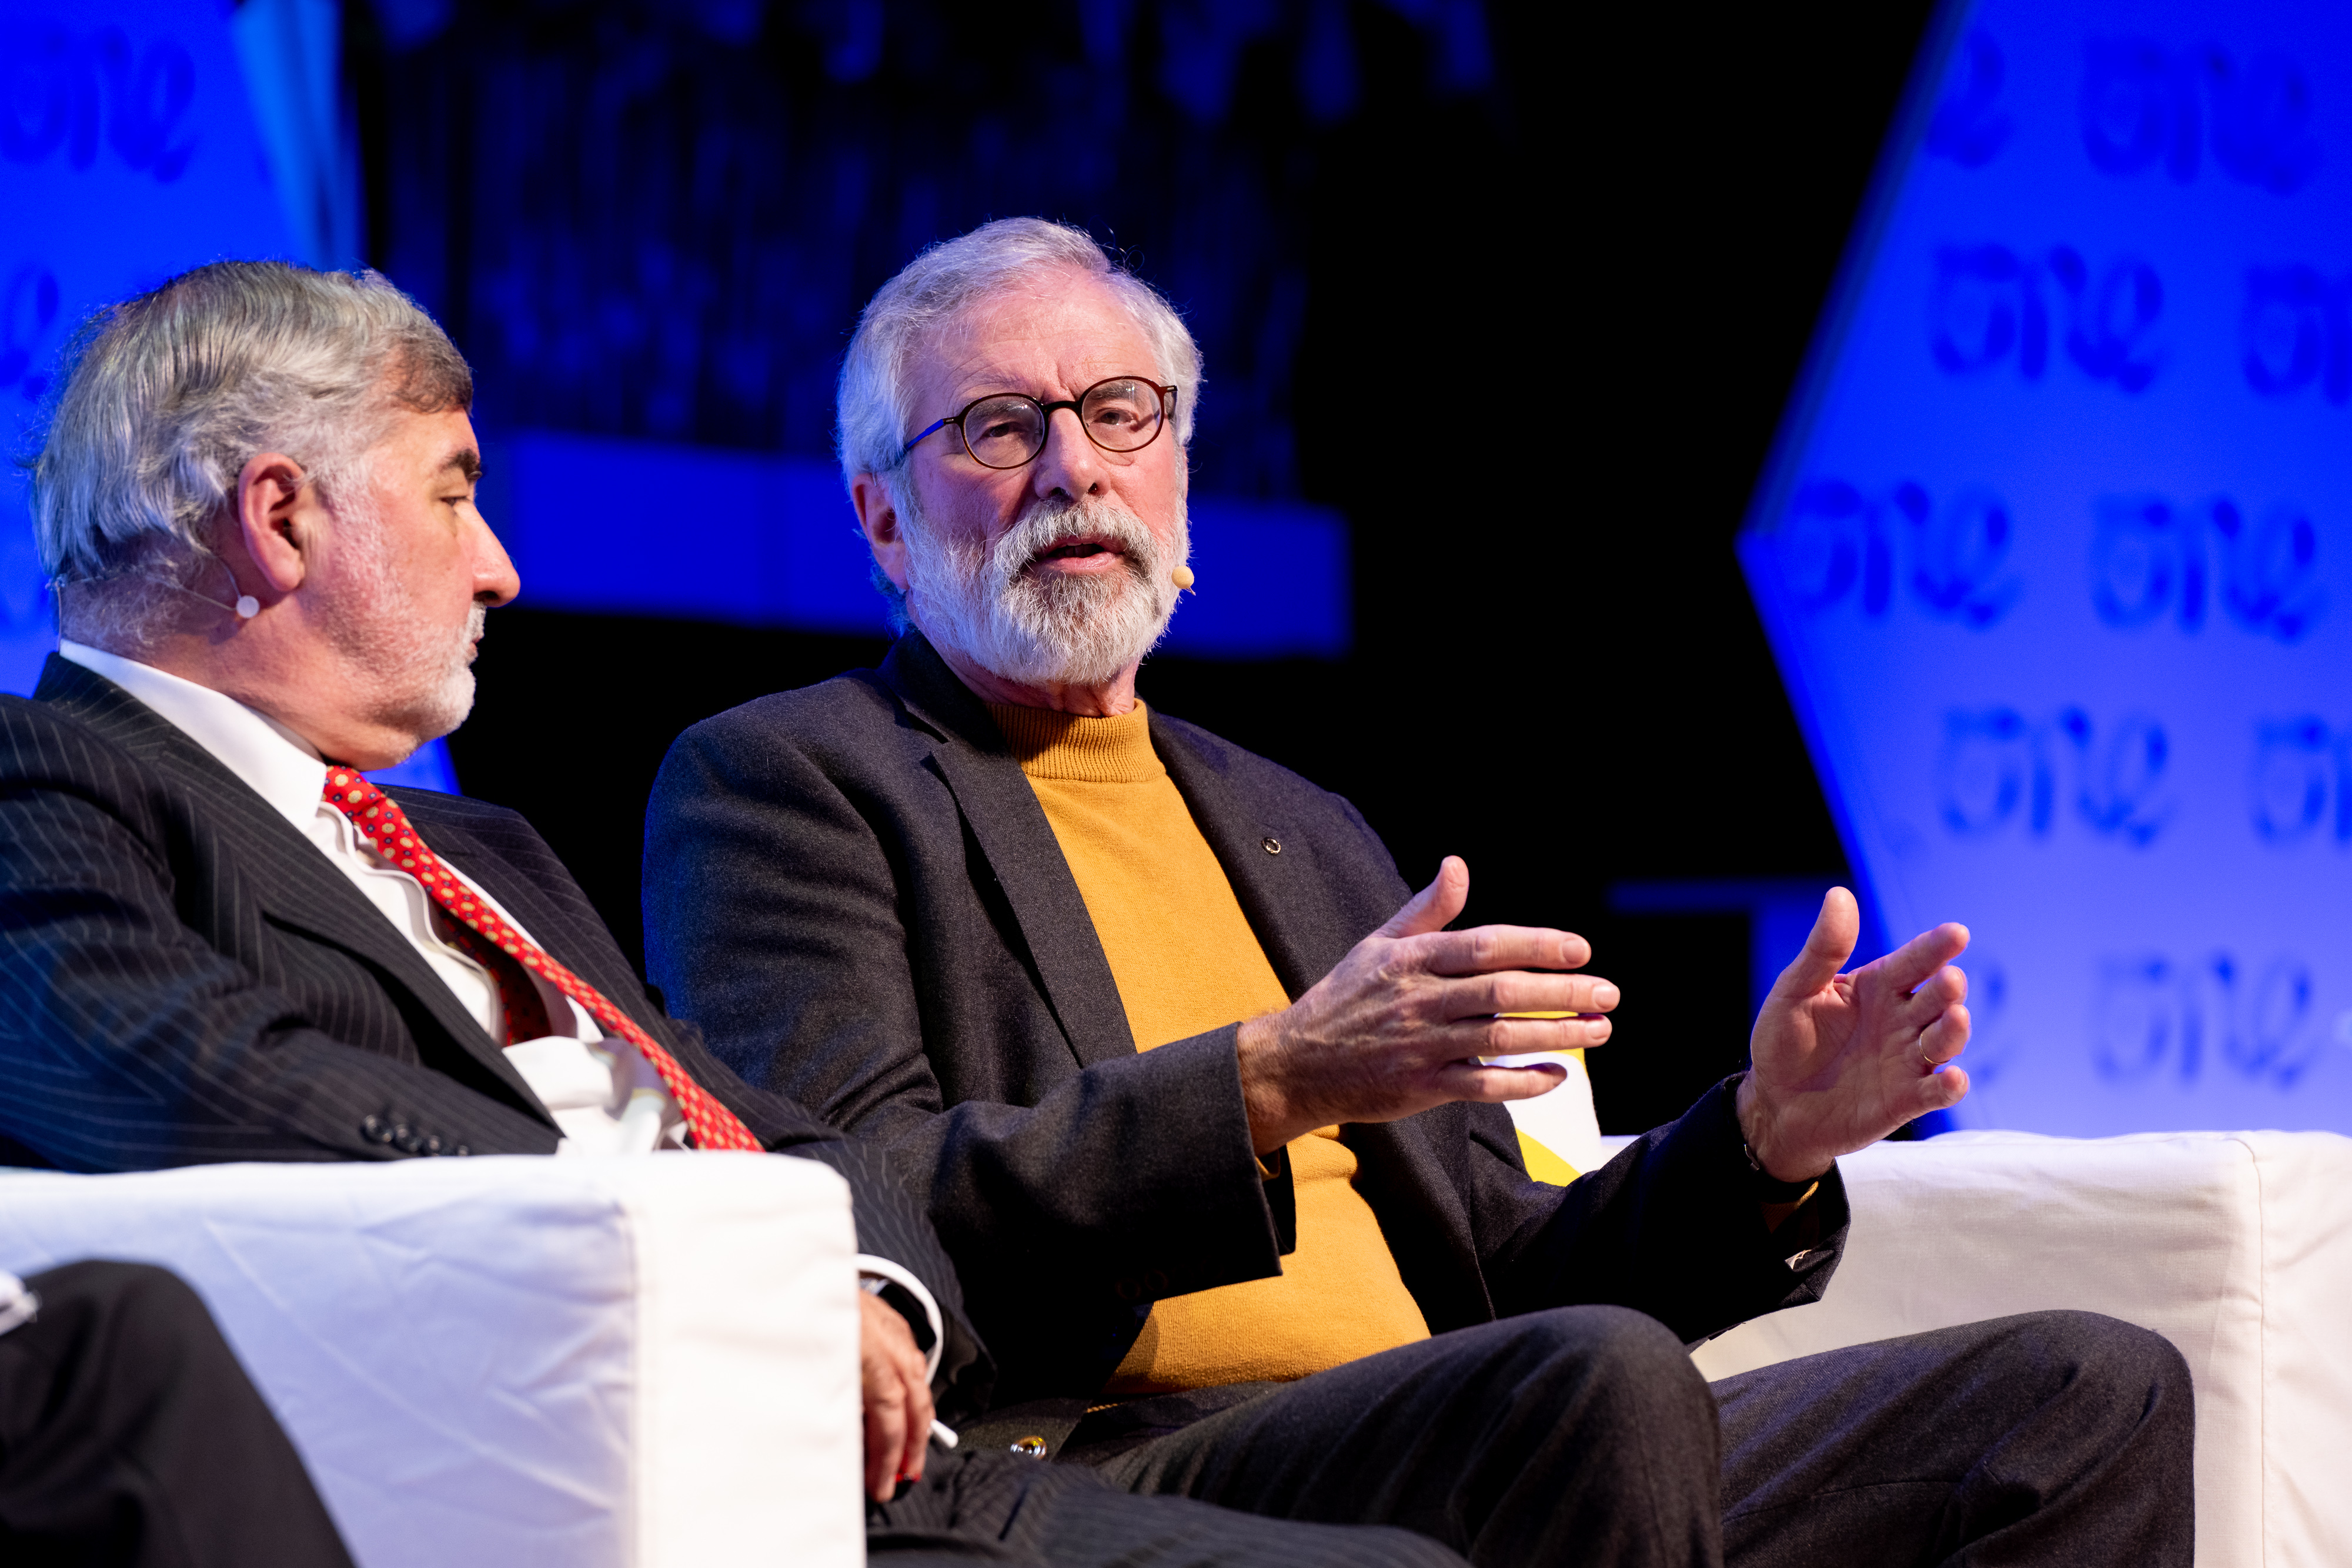 Former Sinn Fein President Gerry Adams speaking at the One Young World summit at the ICC in Belfast. (One Young World)